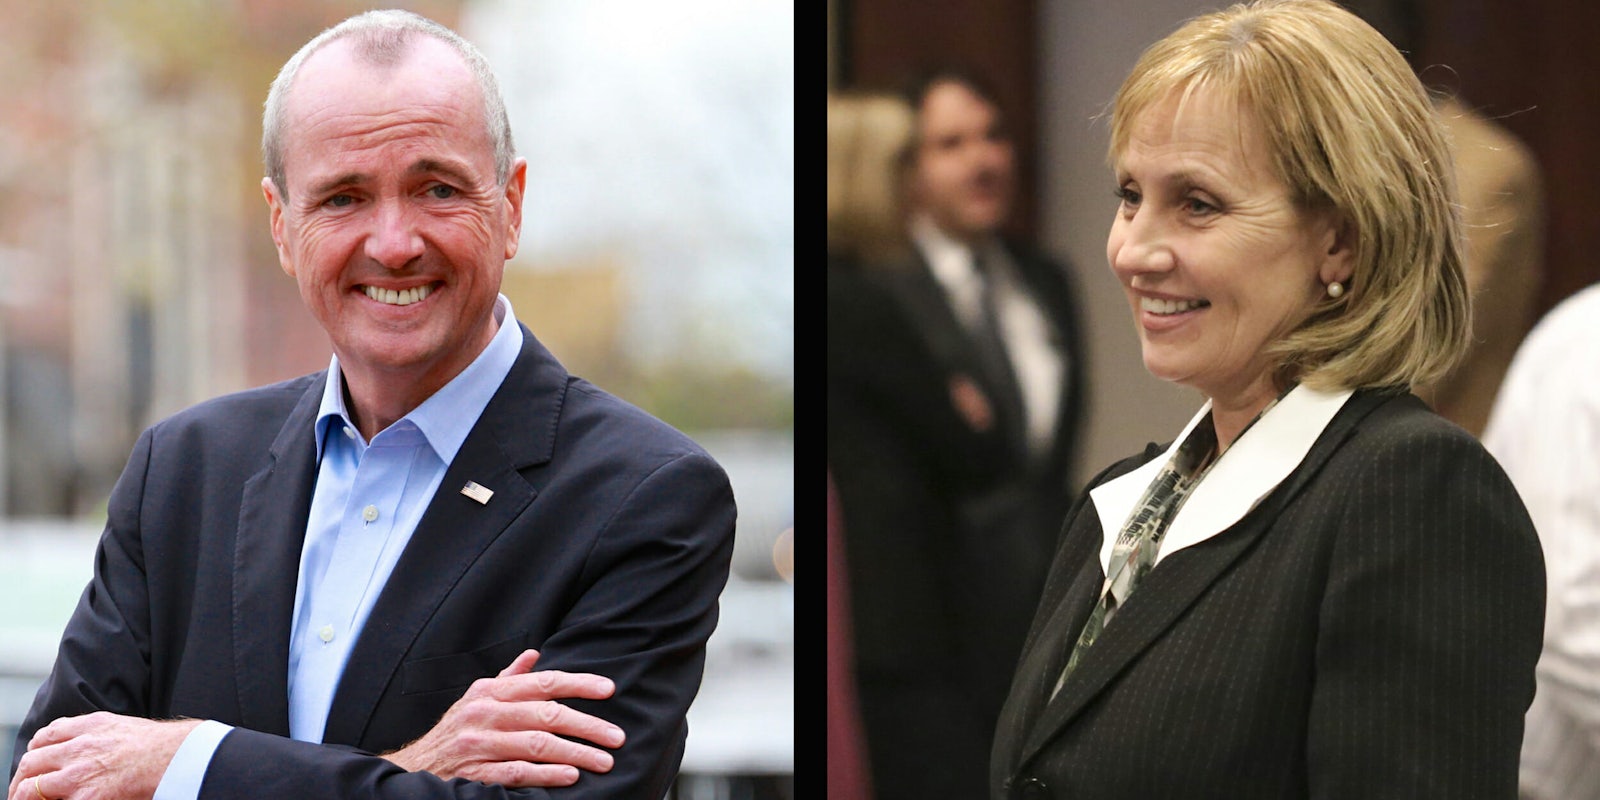 Live election results for New Jersey governor race. Phil Murphy vs. Kim Guadagno